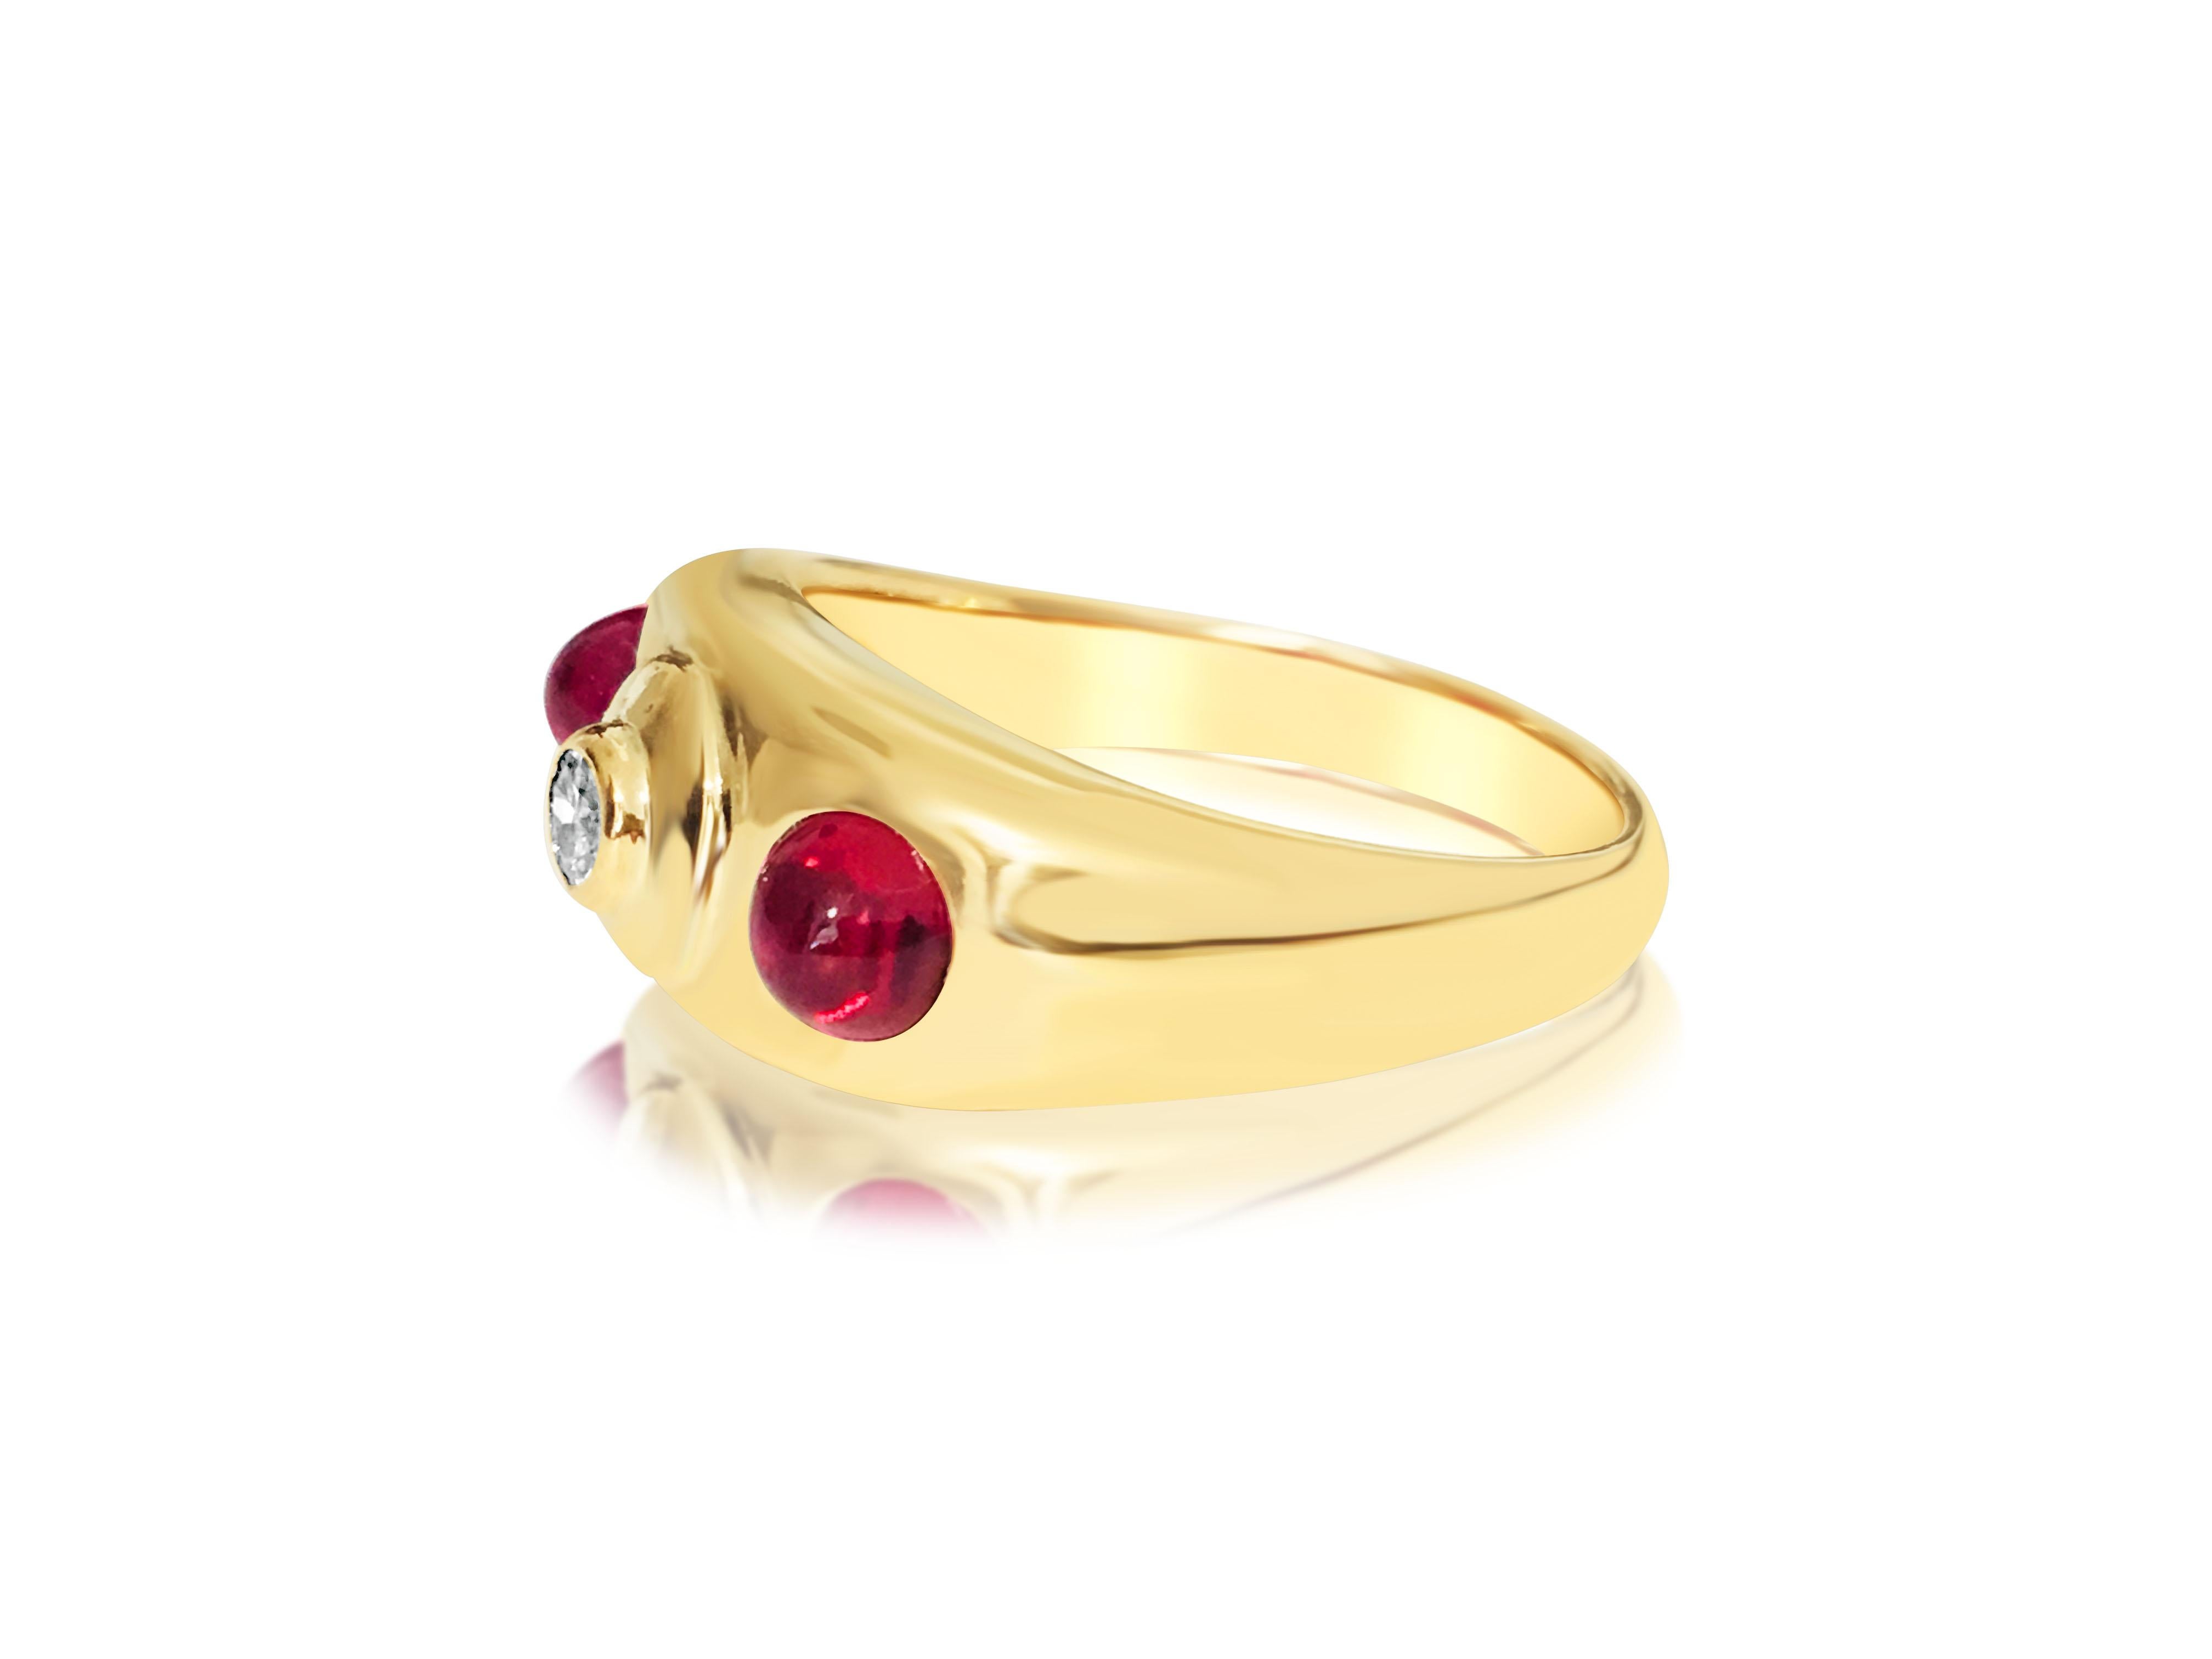 Brilliant Cut Vintage 14k Gold Ruby Diamond 3 Stone Ring For Sale